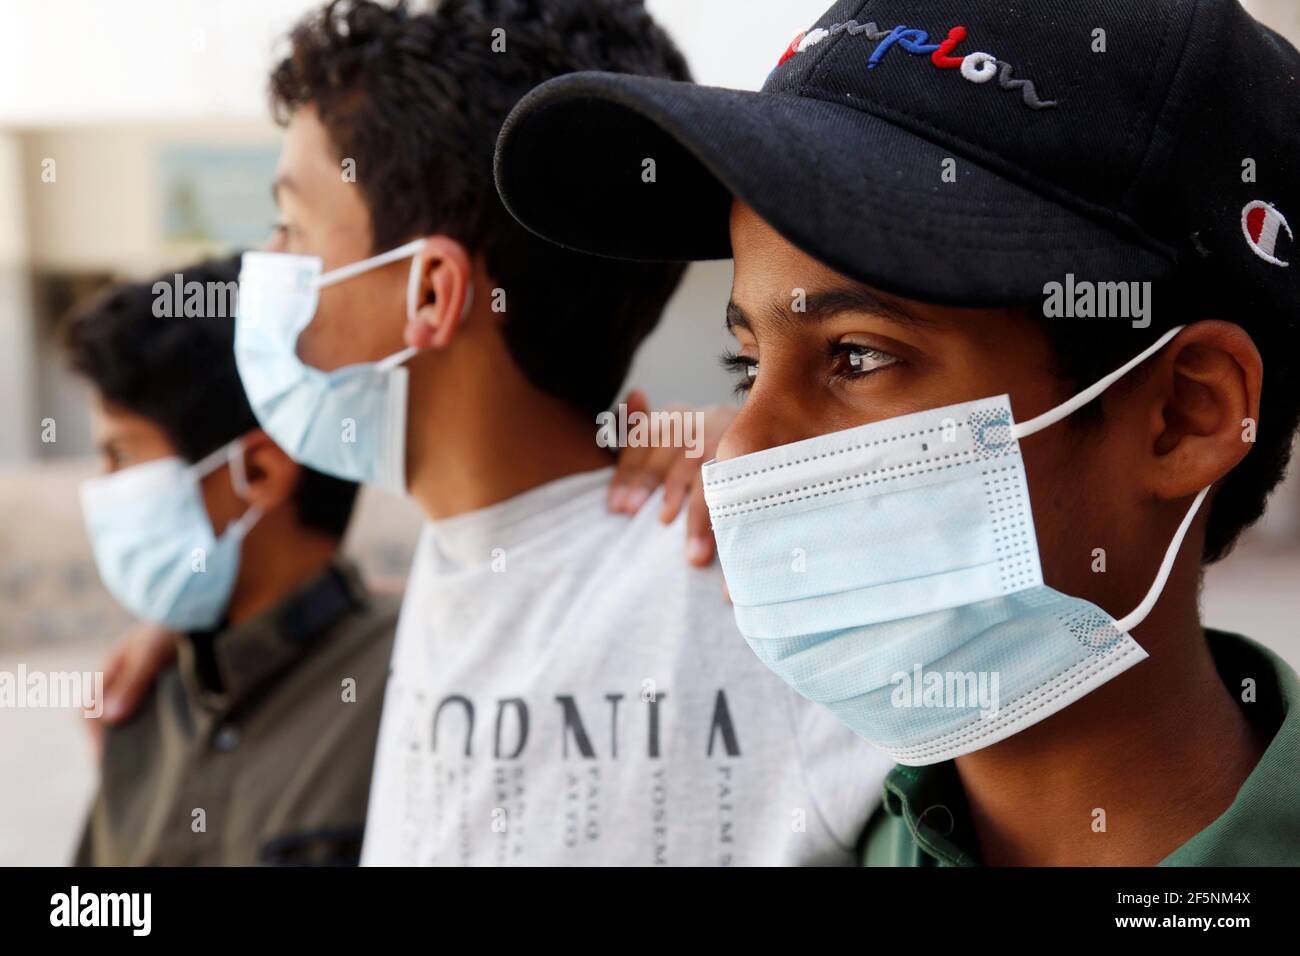 Sanaa, Yemen. 27th Mar, 2021. Children wearing face masks are seen at a school in Sanaa, Yemen, March 27, 2021. The educational authority in Sanaa, which is controlled by the Houthi rebels, decides to end the current semester a month earlier because of the spread of COVID-19. Credit: Mohammed Mohammed/Xinhua/Alamy Live News Stock Photo